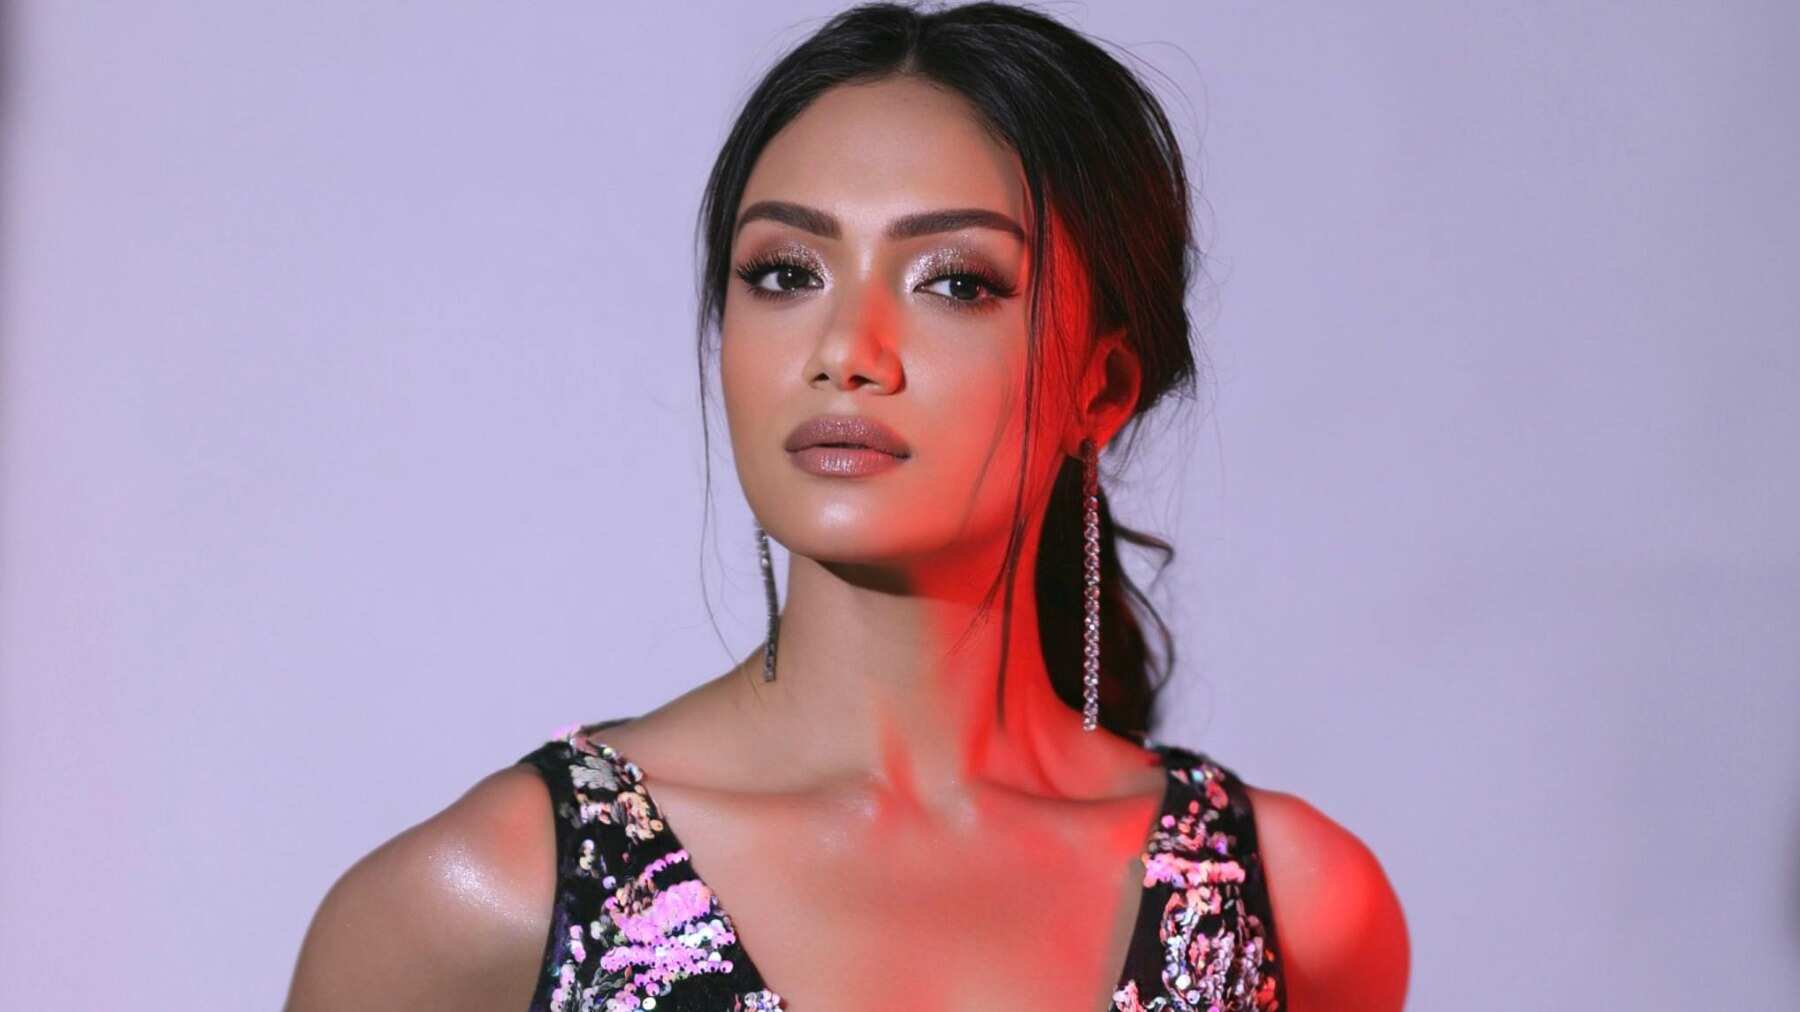 https://www.mobilemasala.com/movies/Exclusive-Shruti-Das-on-Julie-Instead-of-quantity-I-would-rather-work-on-one-significant-character-and-this-is-one-such-role-i225218